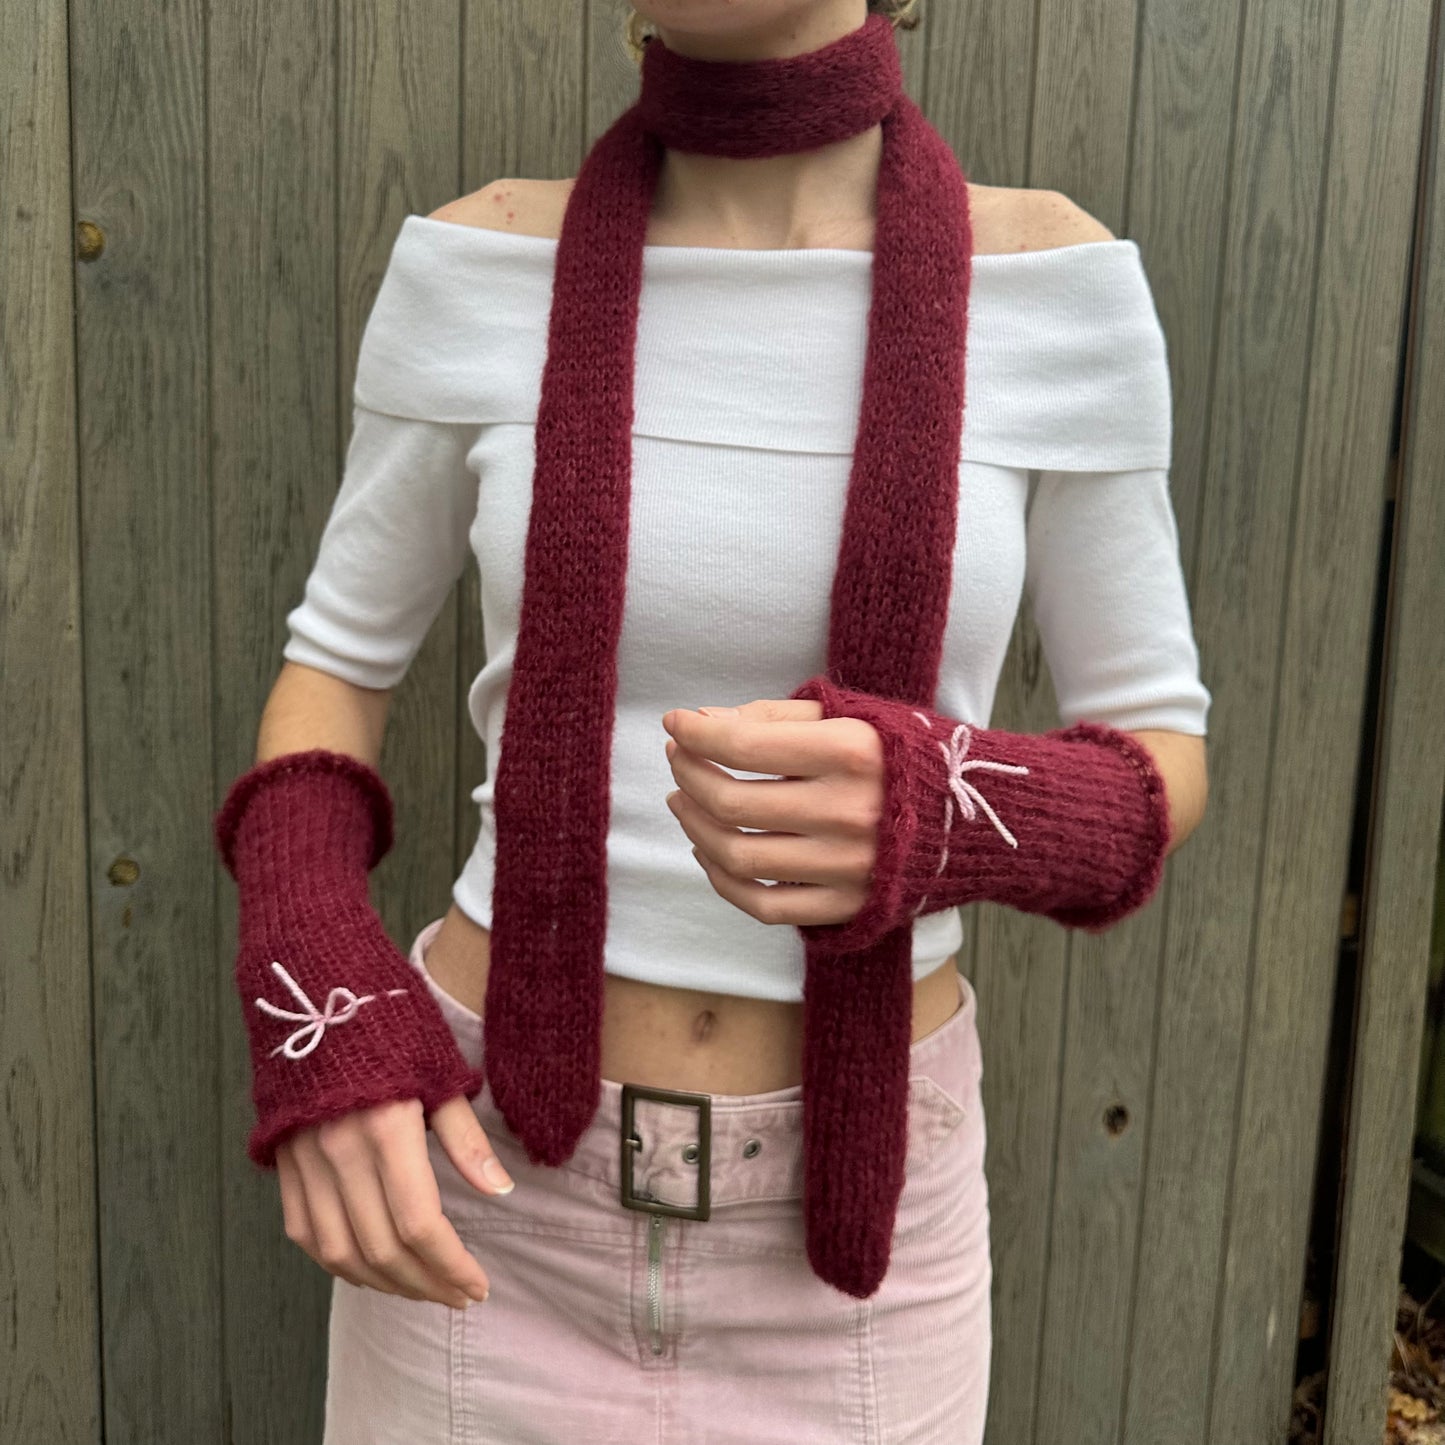 Handmade knitted mohair hand warmers in burgundy and baby pink - with thumb hole